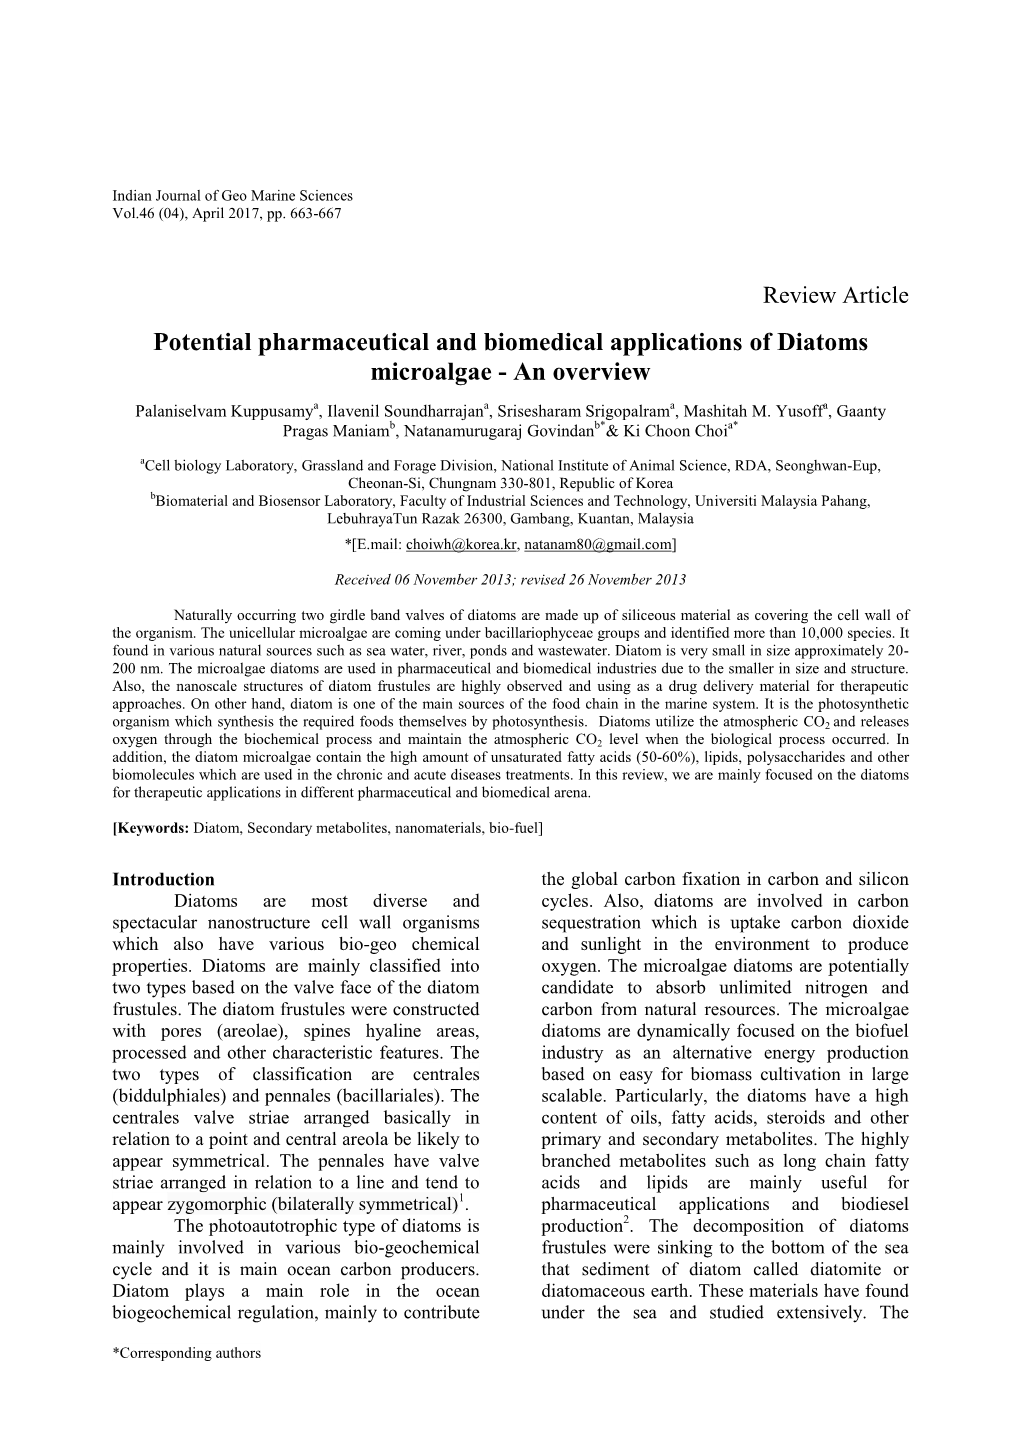 Potential Pharmaceutical and Biomedical Applications of Diatoms Microalgae - an Overview